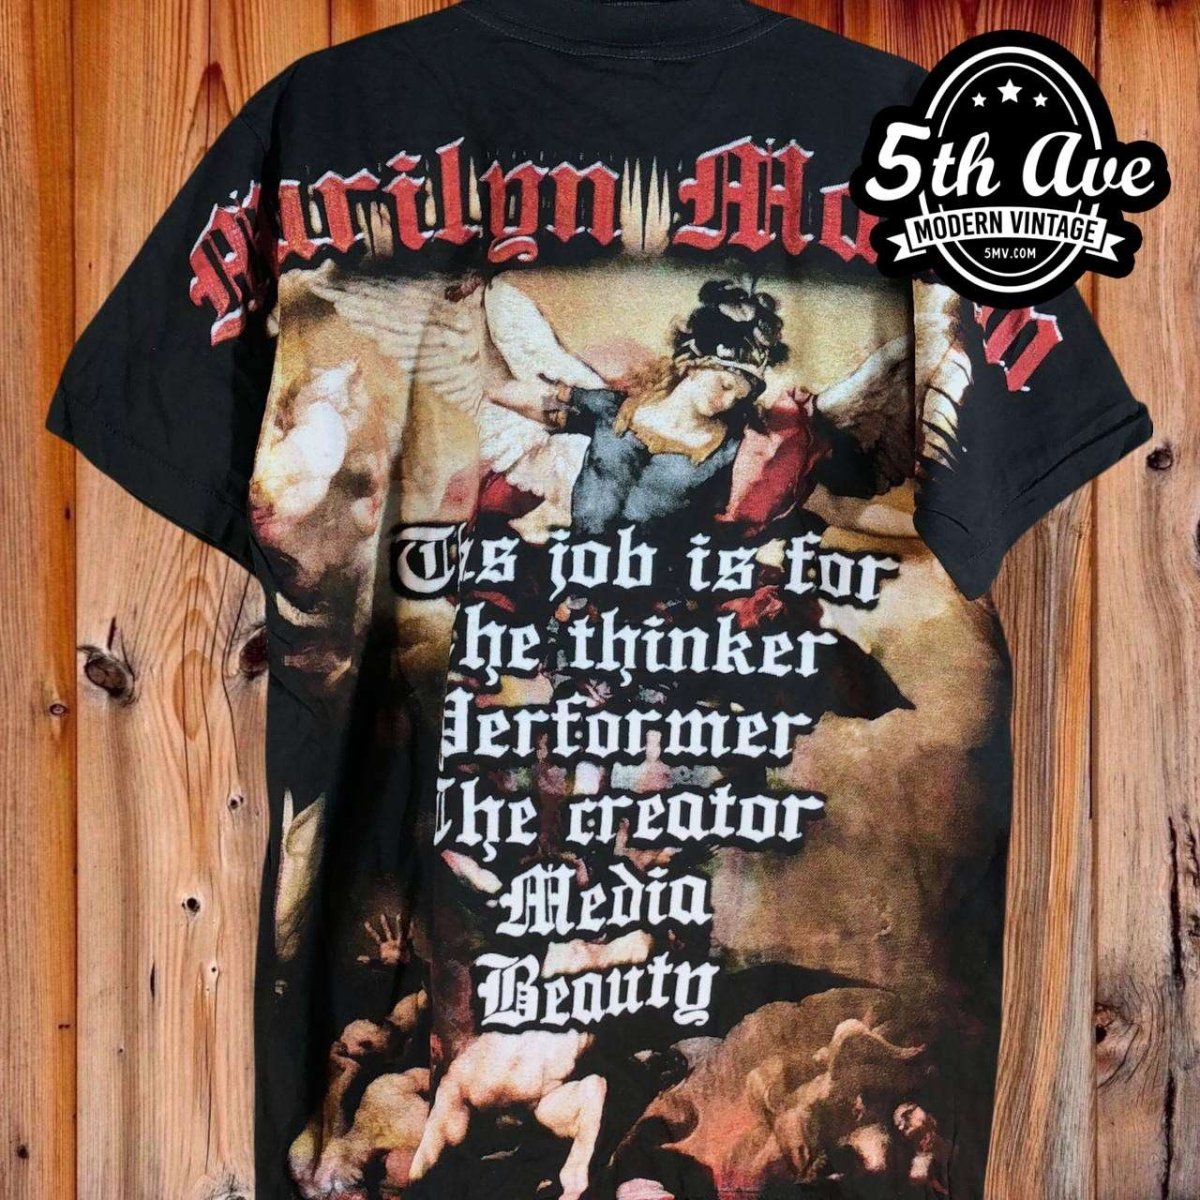 Marilyn Manson: Bootleg All-Over Print Single Stitch Short Sleeve t shirt with Giant Tag - Vintage Band Shirts